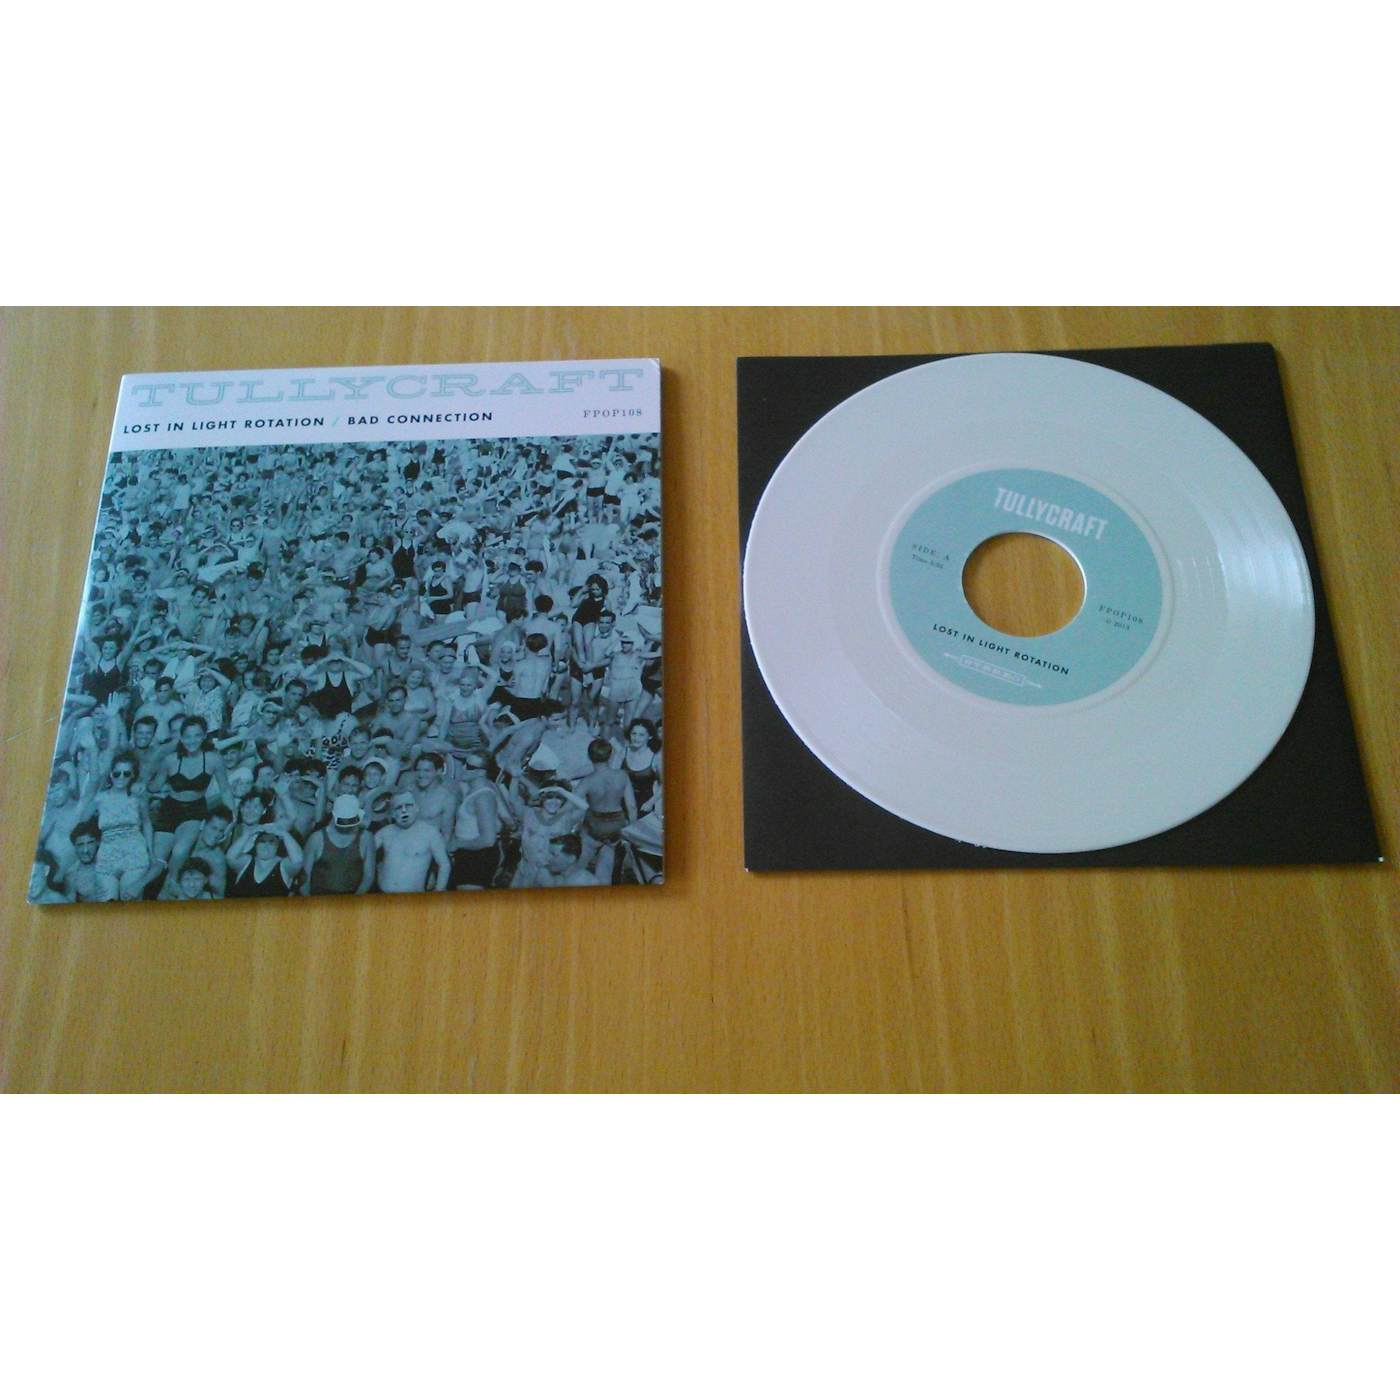 Tullycraft 'Lost In Light Rotation / Bad Connection' Vinyl 7" - White Vinyl Record